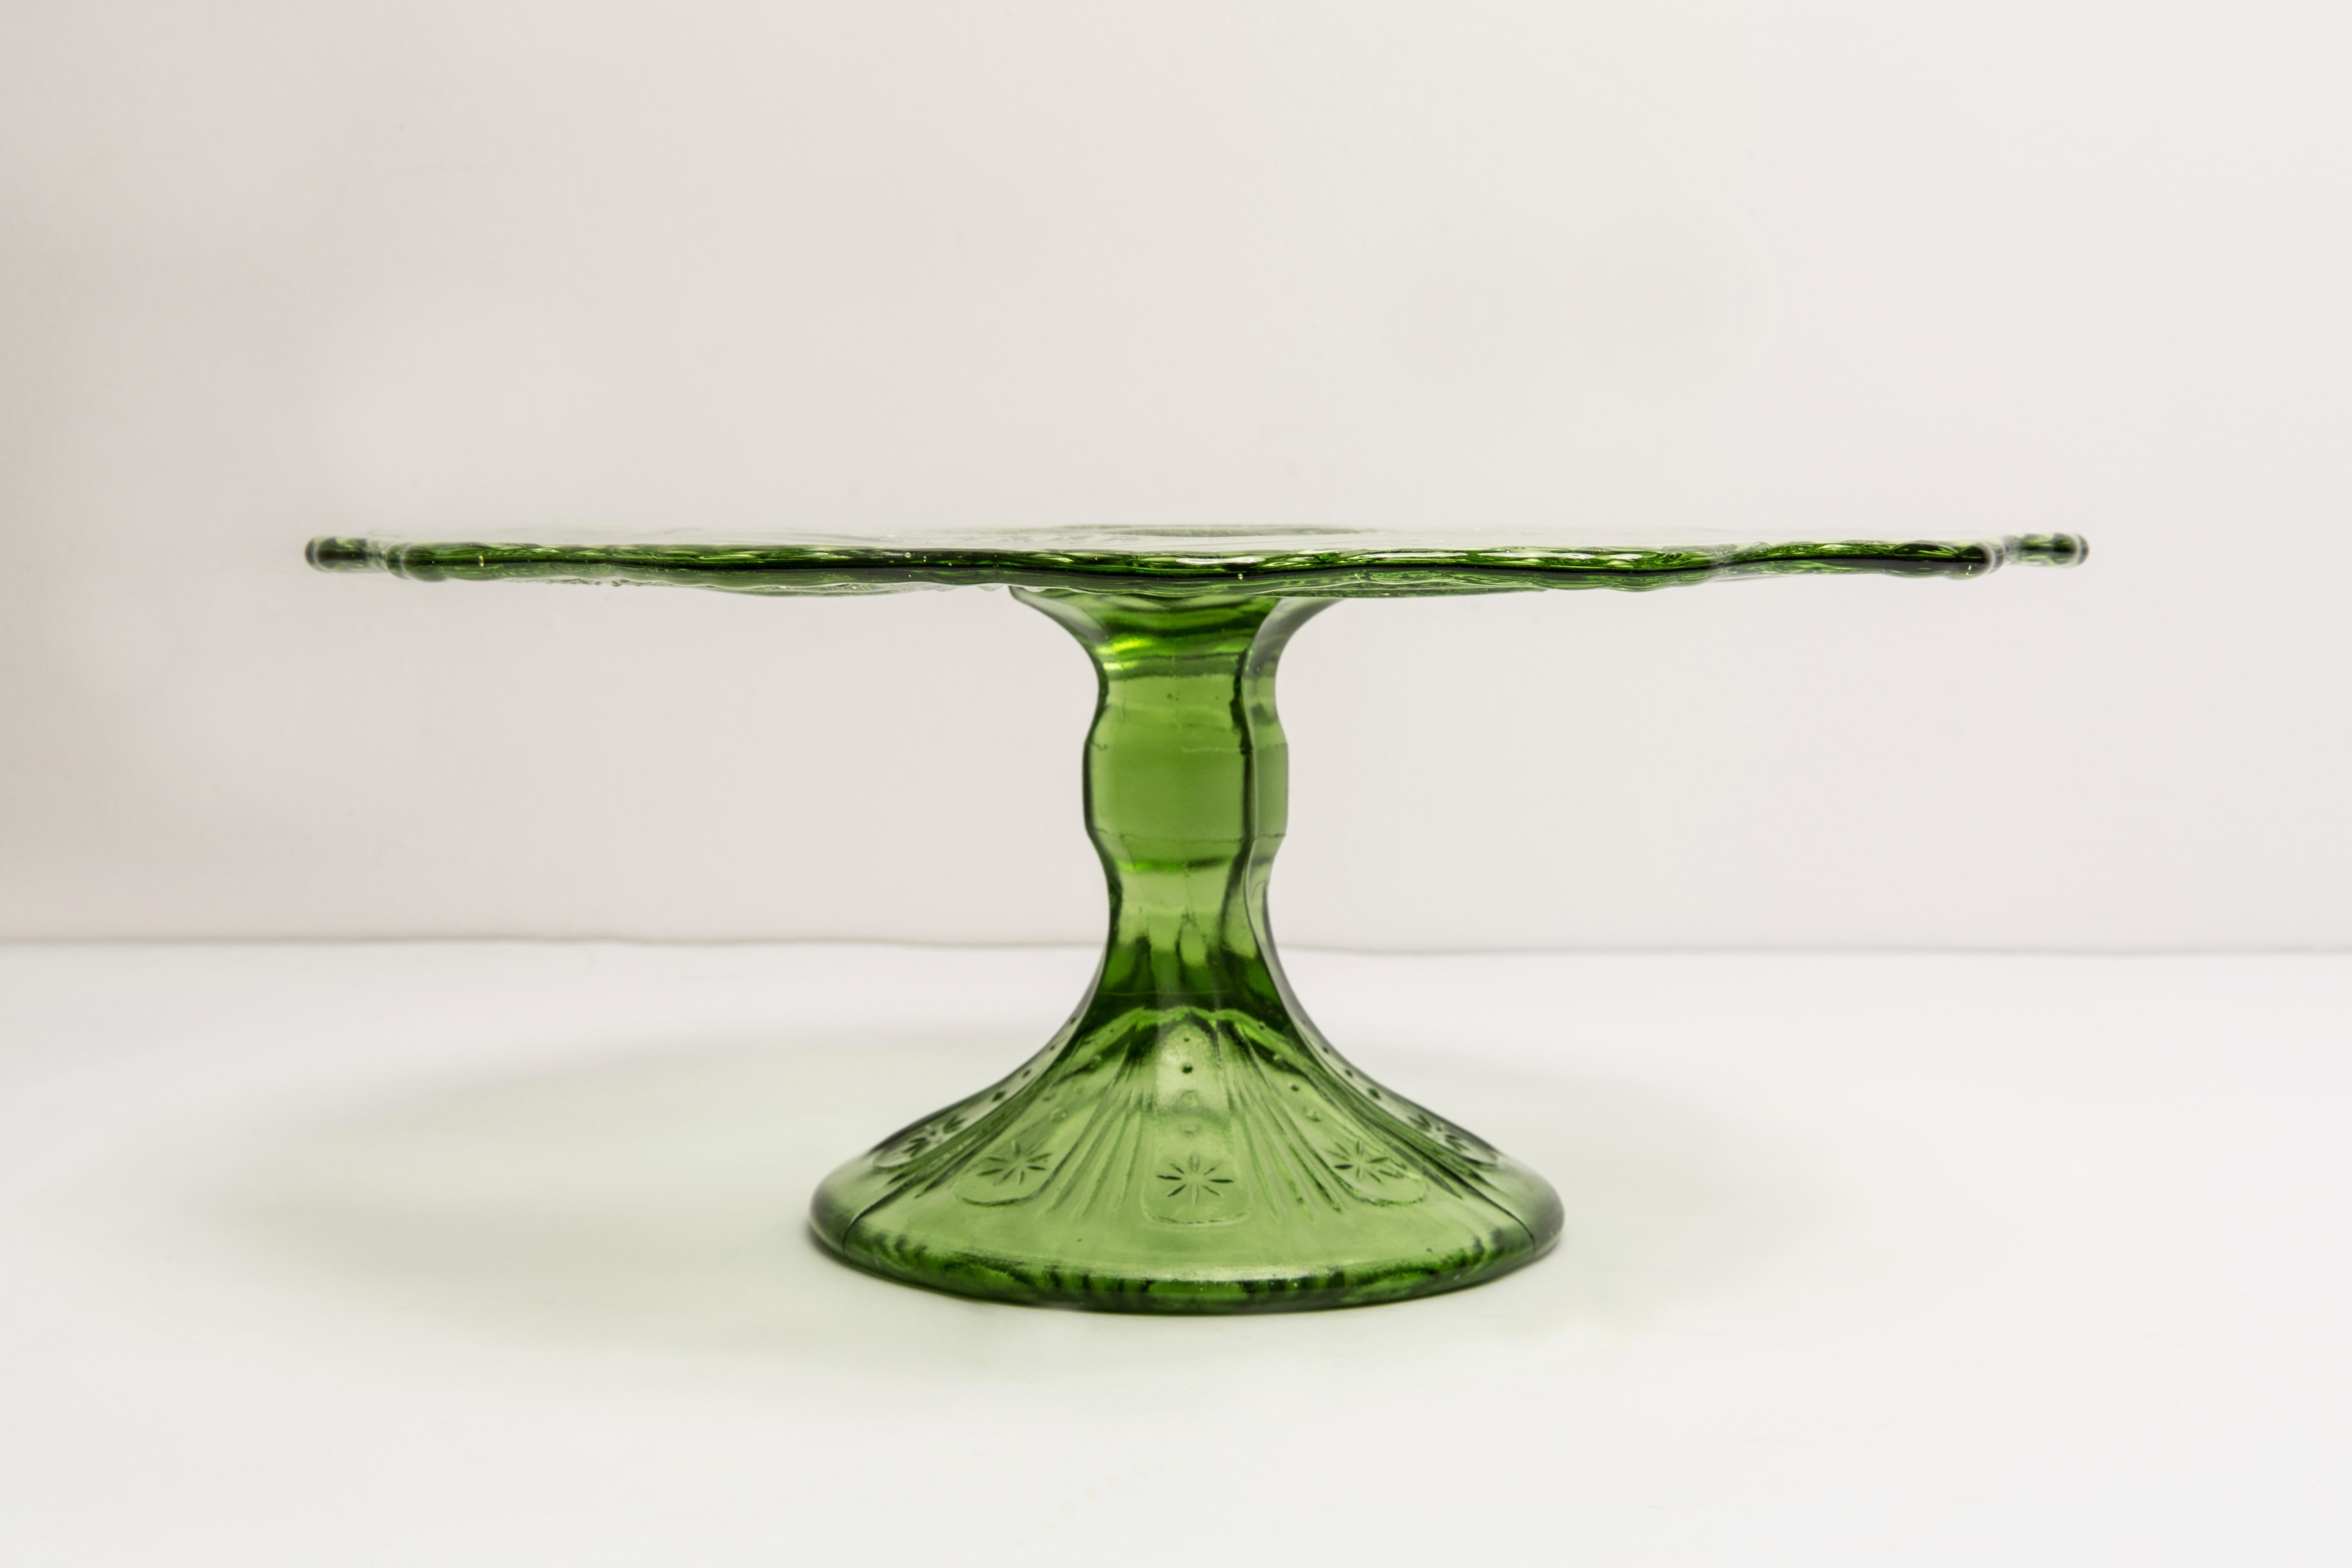 Ceramic Vintage Green Decorative Glass Plate or Cake Stand, Italy, 1960s